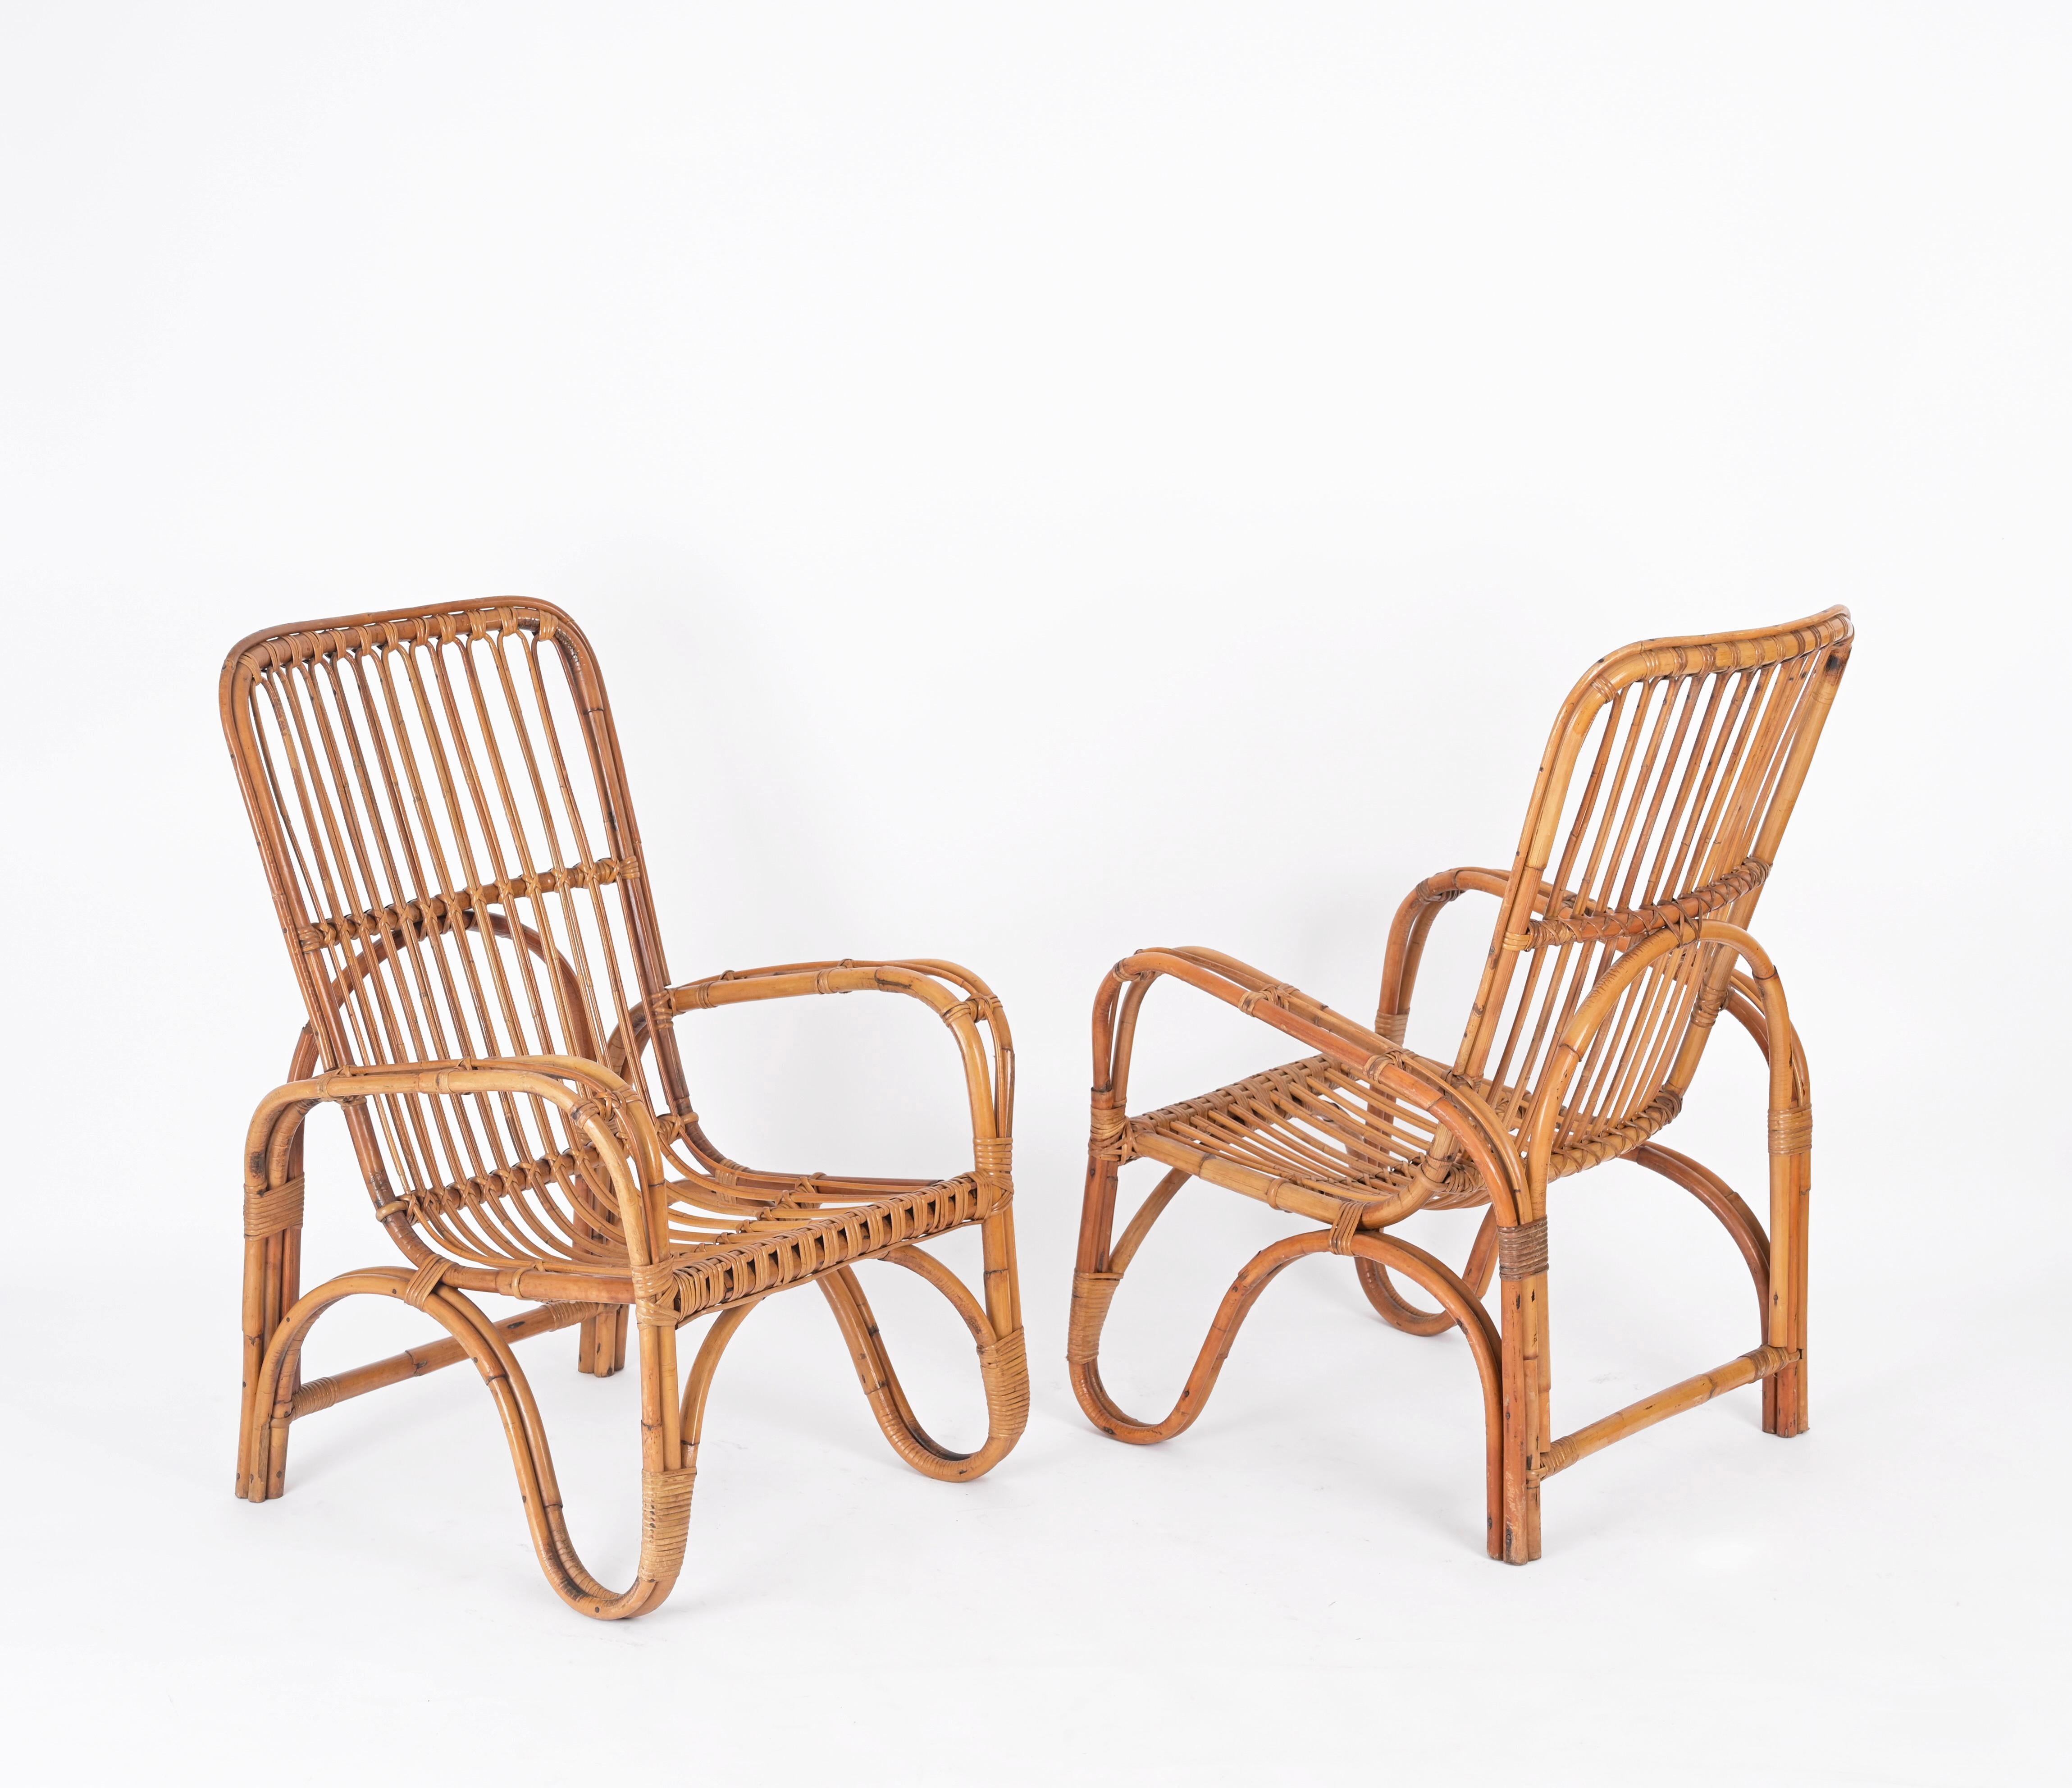 Fantastic pair of Mid-Century French Riviera style armchairs fully made in curved rattan, bamboo and hand-woven wicker. These lovely armchairs were designed in Italy during the 1960s and are attributed to Tito Agnoli.

The armchairs are in fantastic